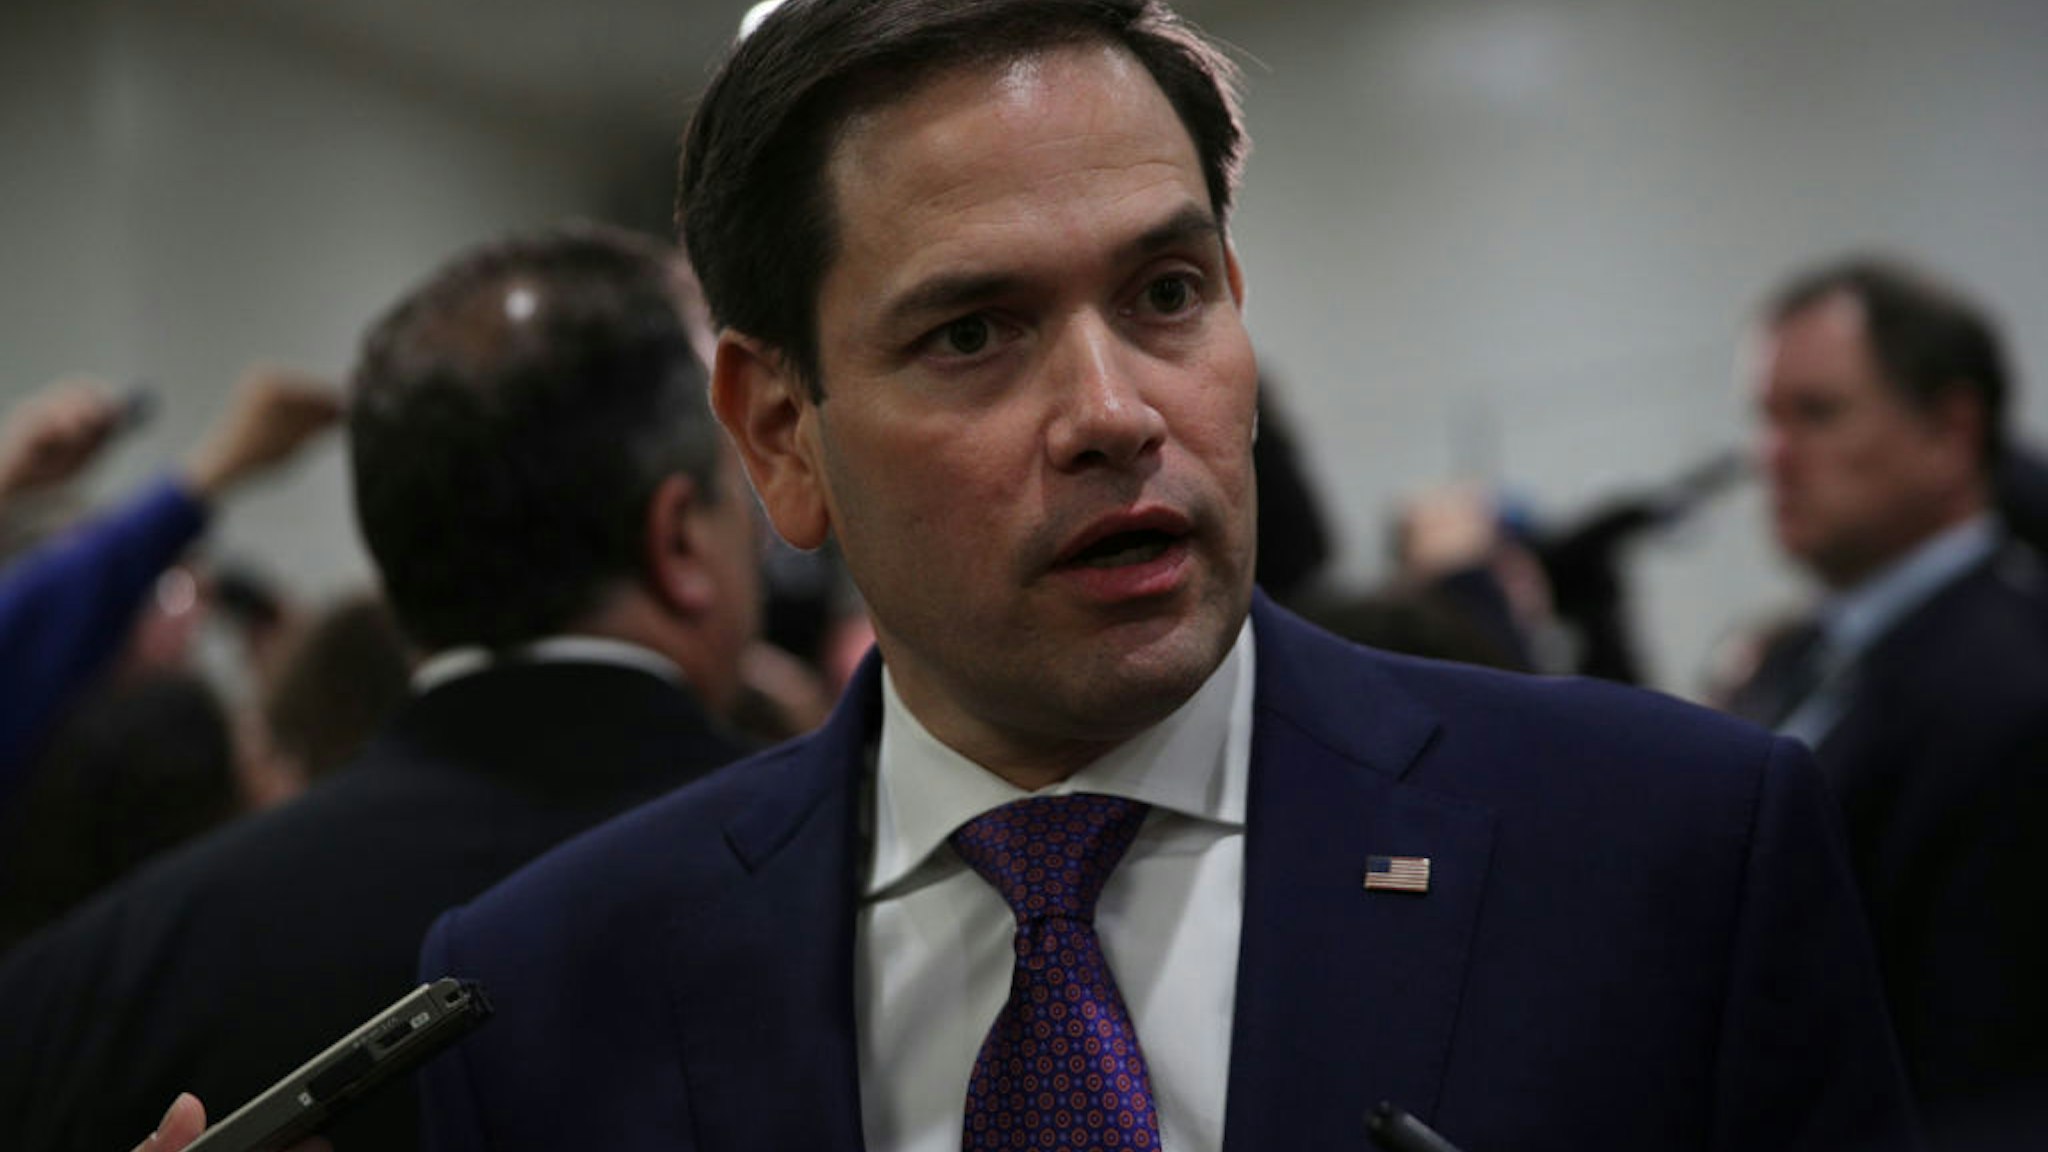 Sen. Marco Rubio (R-FL) speaks to members of the media after a closed briefing for Senate members May 21, 2019 on Capitol Hill in Washington, DC. Secretary of State Mike Pompeo, Acting Defense Secretary Patrick Shanahan and Chairman of Joint Chiefs of Staff Joseph Dunford briefed Congressional members on Iran.